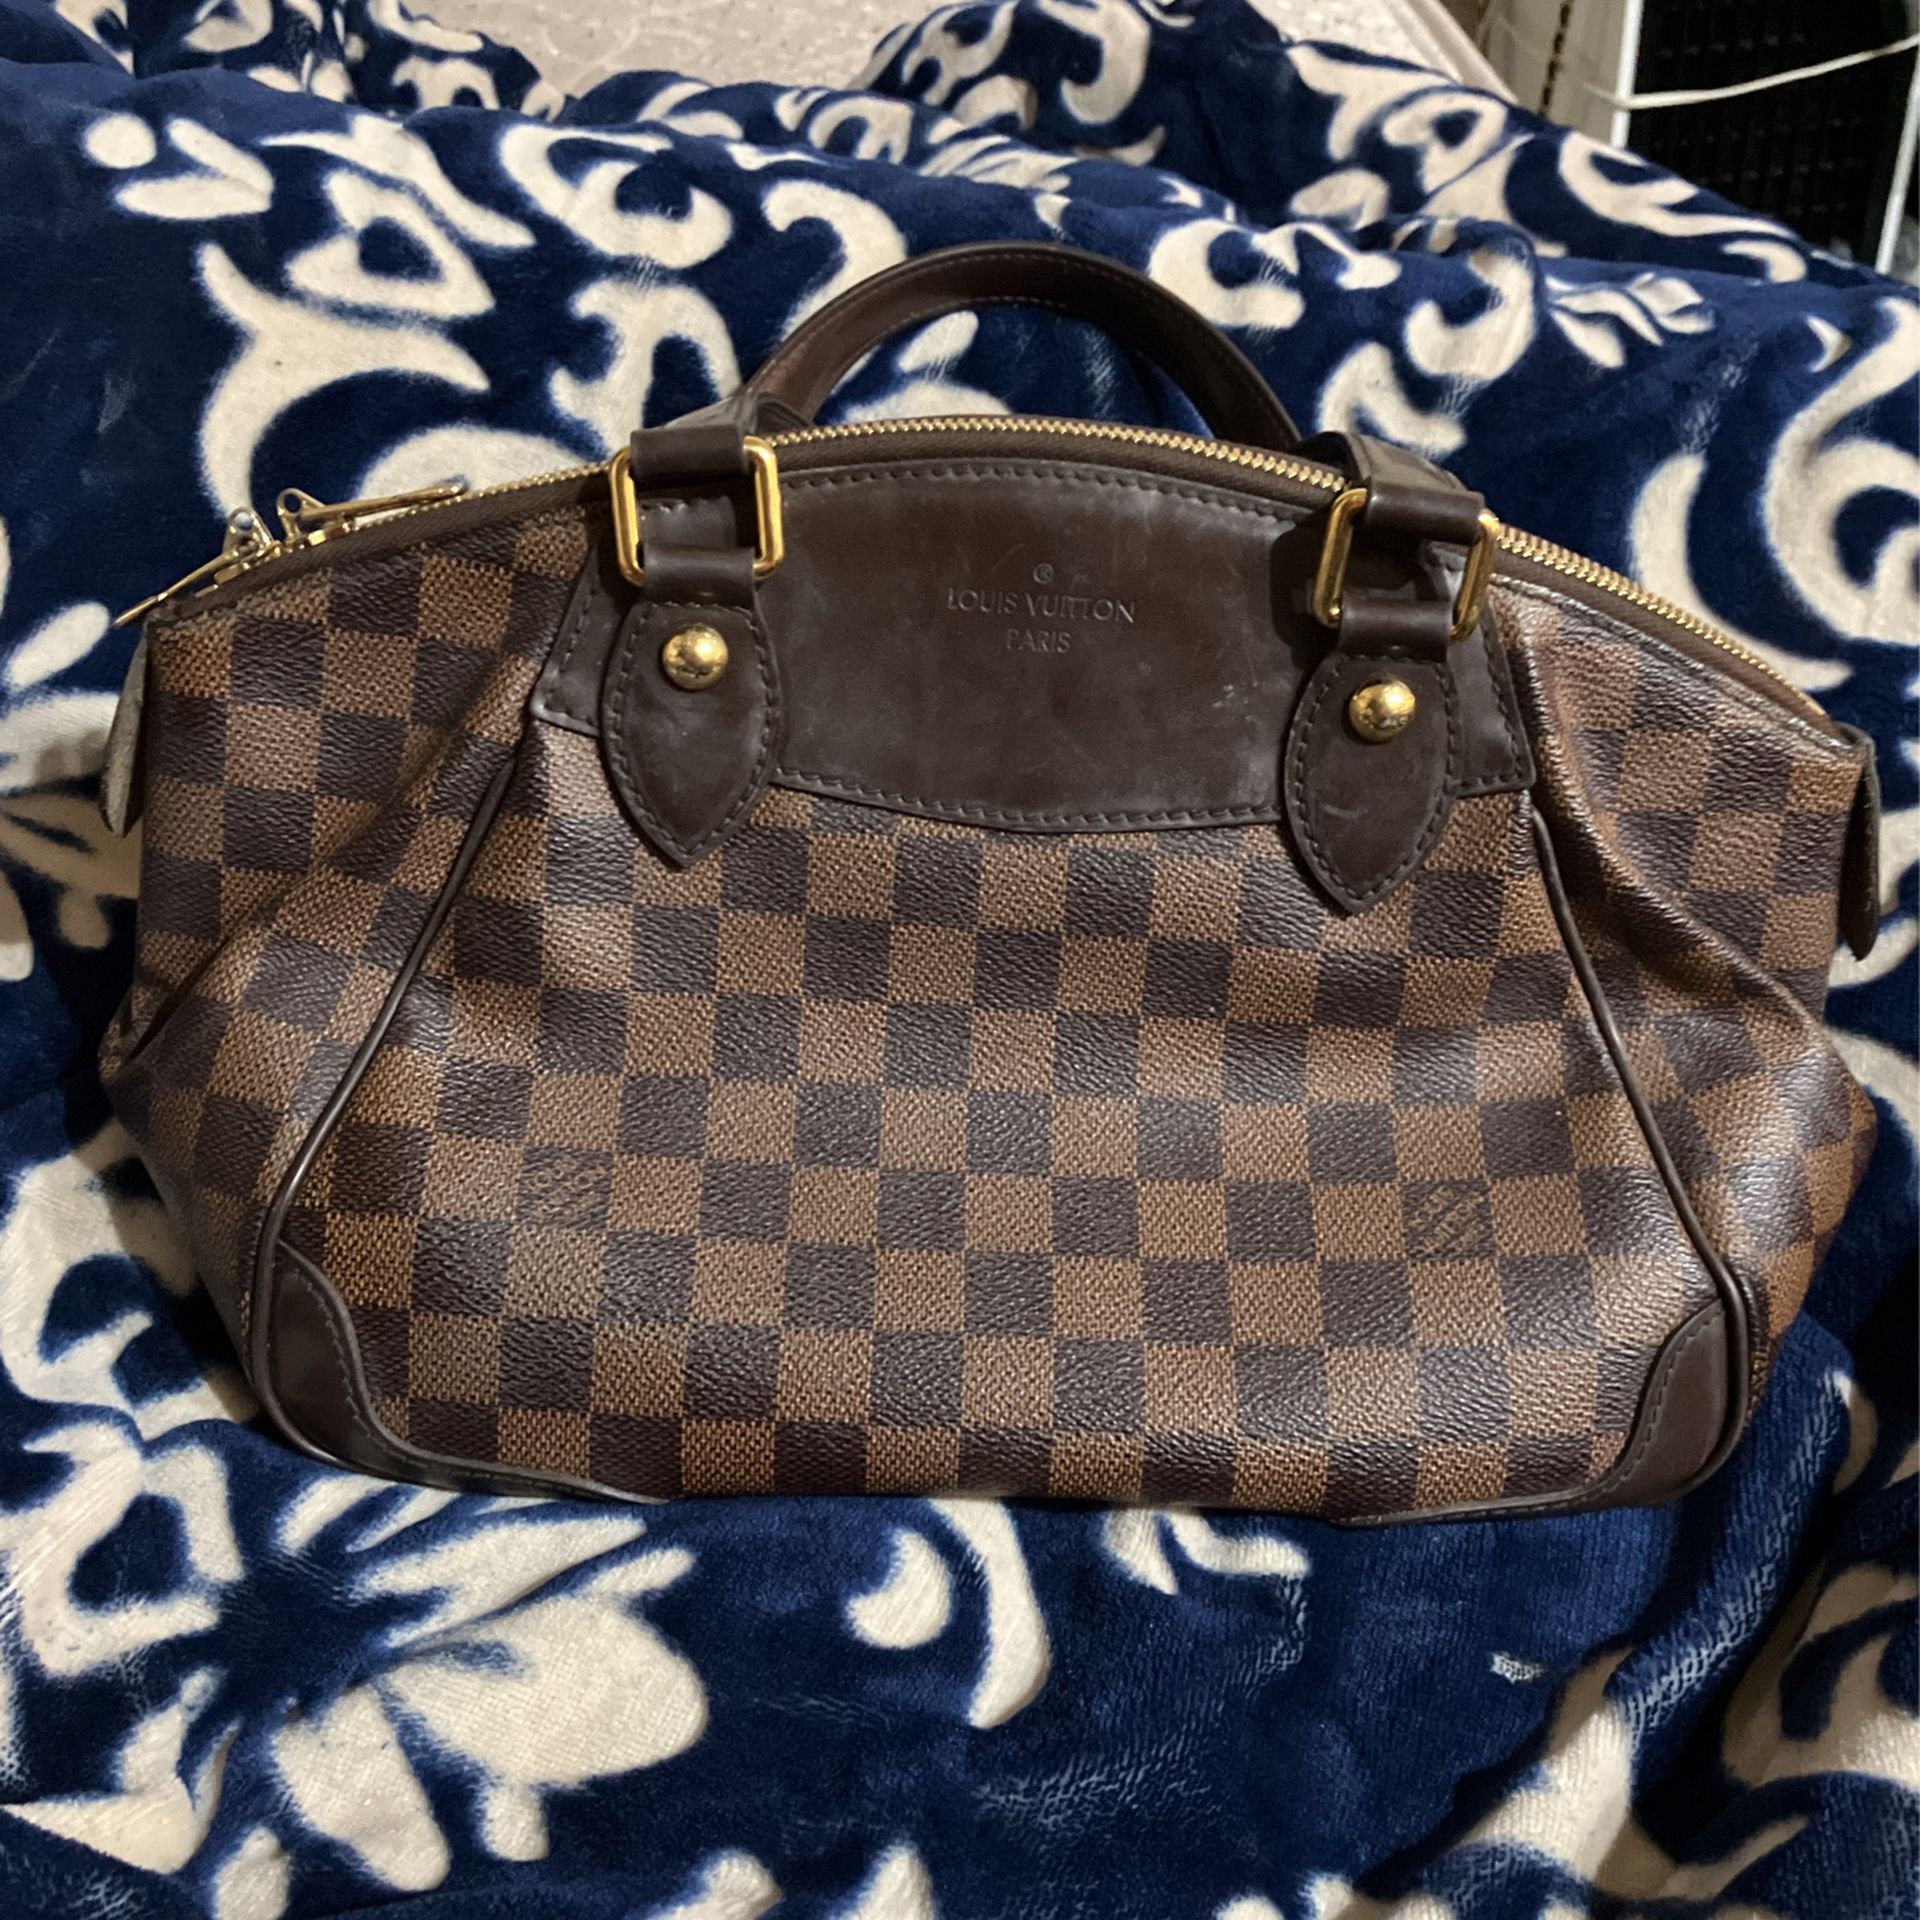 Vintage Louis Vuitton Bags New York City Ny